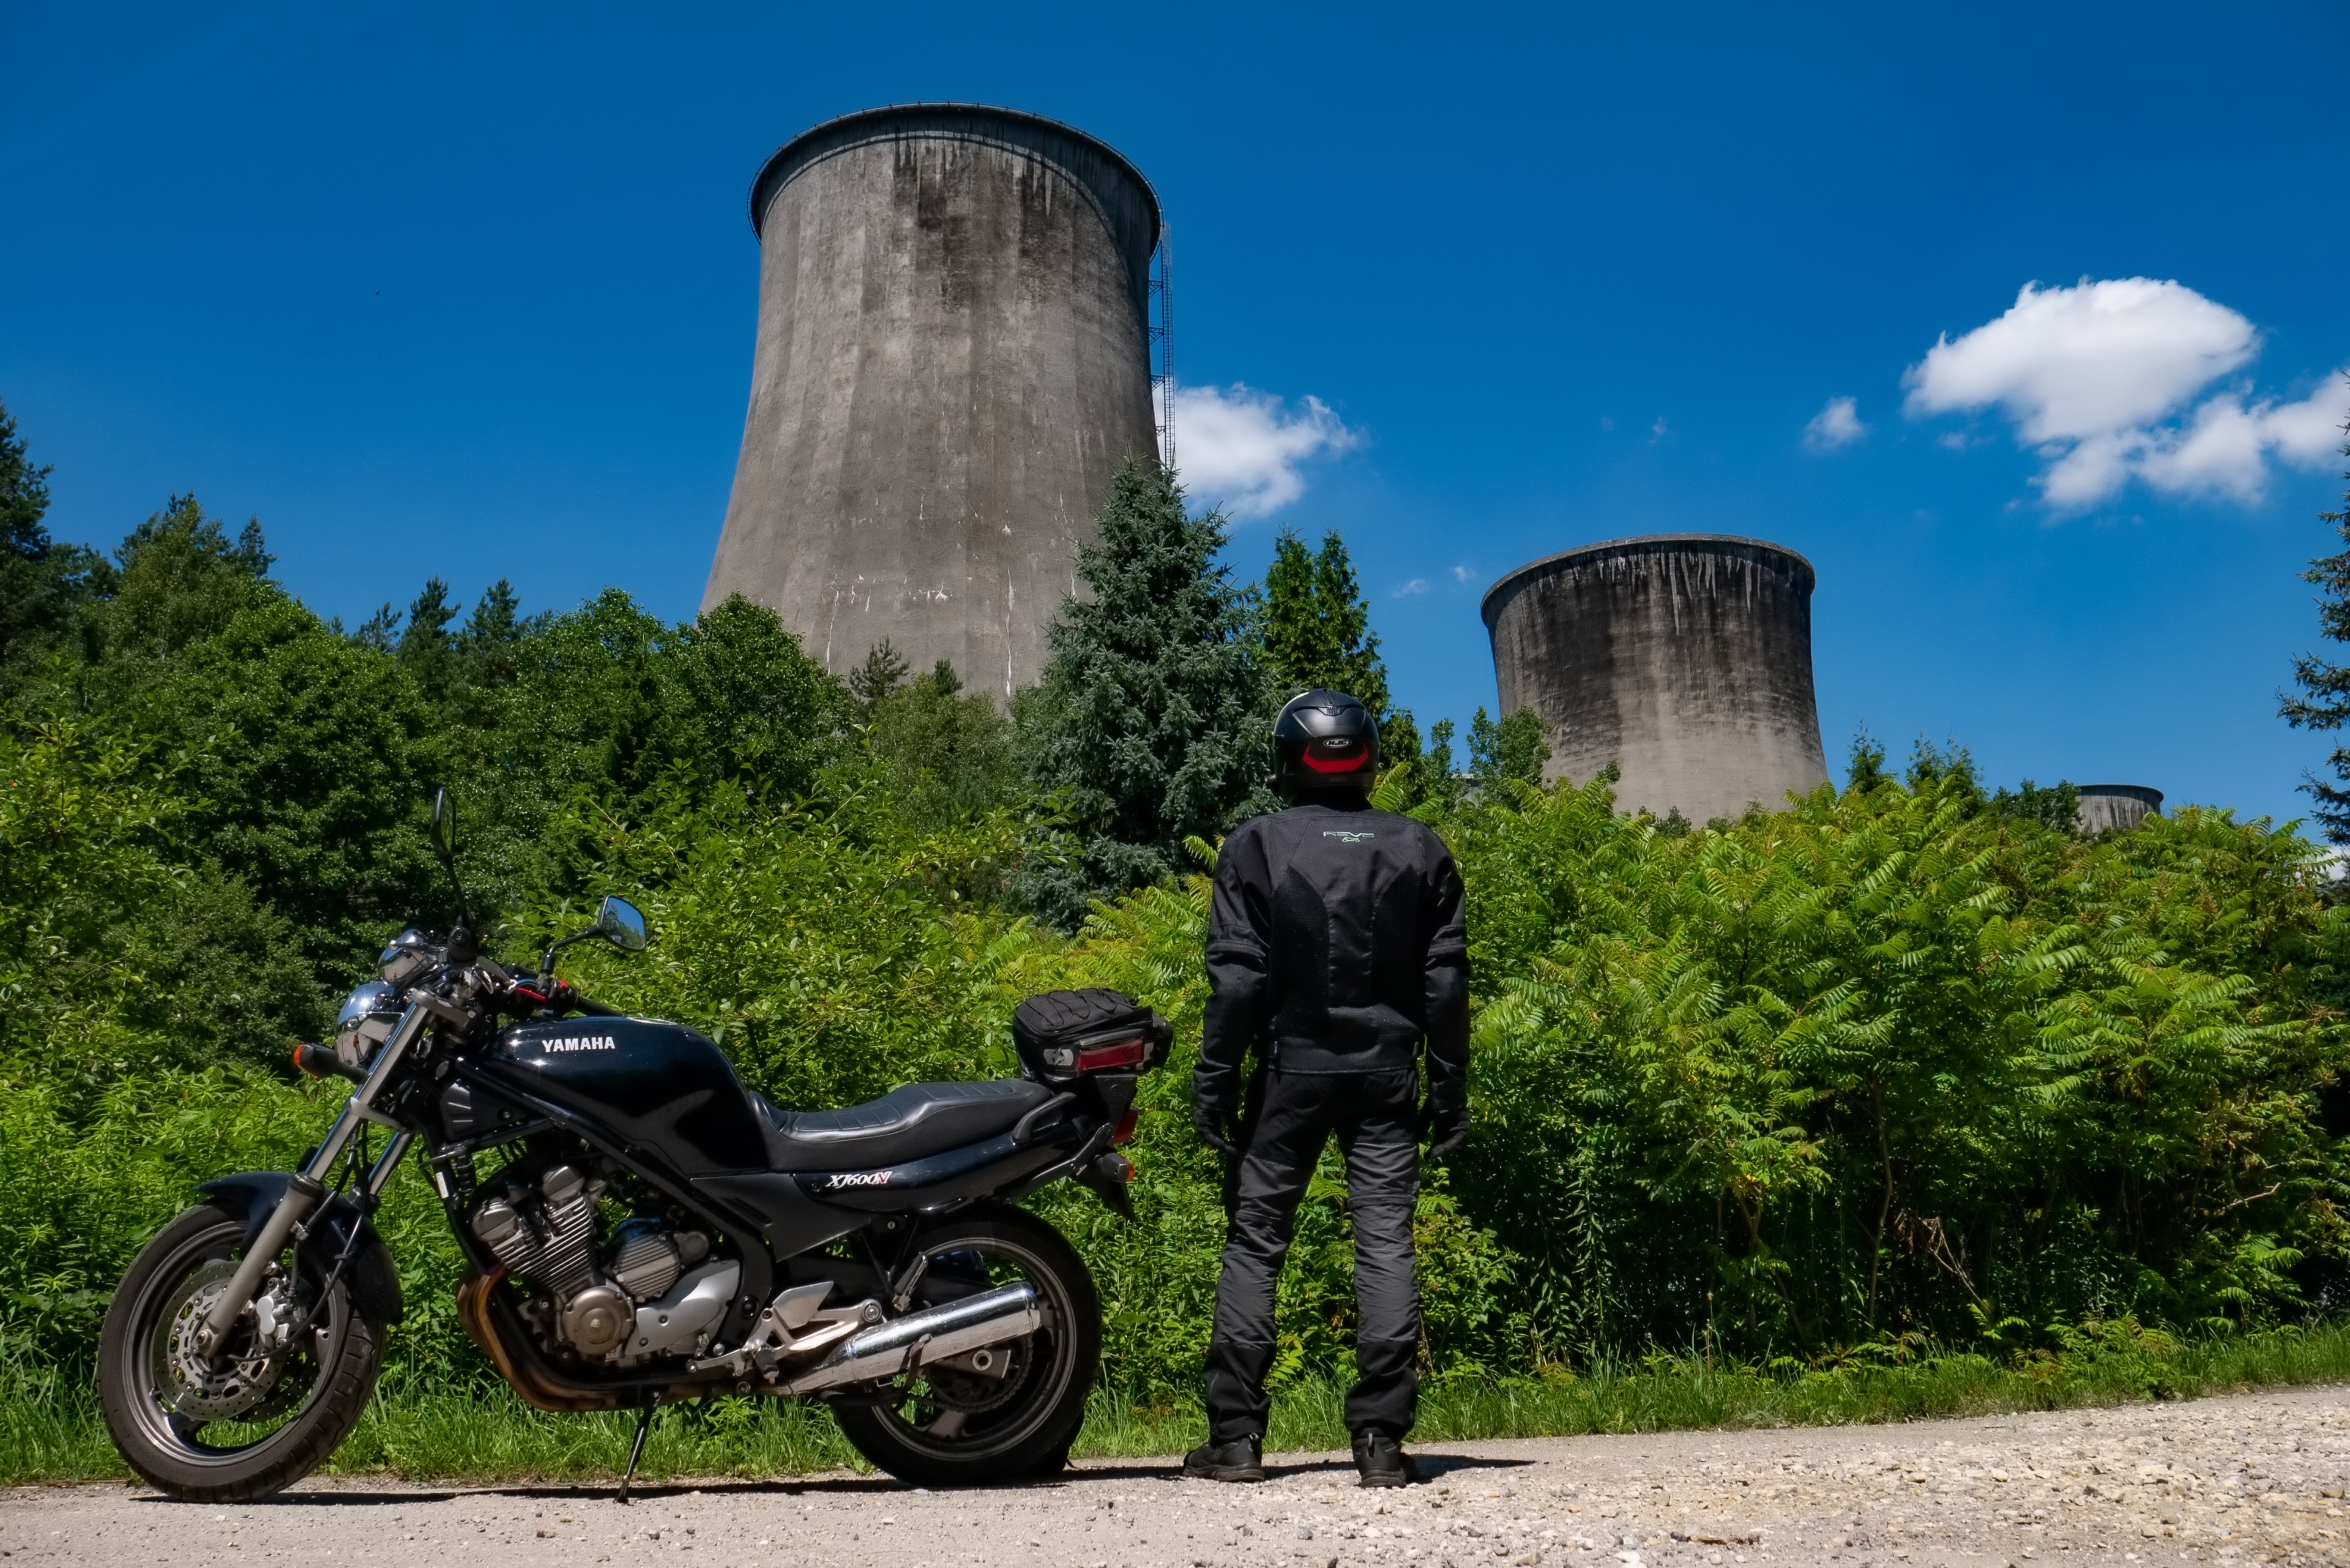 Motorcycle Yamaha Poland Forest Industrial Cooling Towers 3840x2562